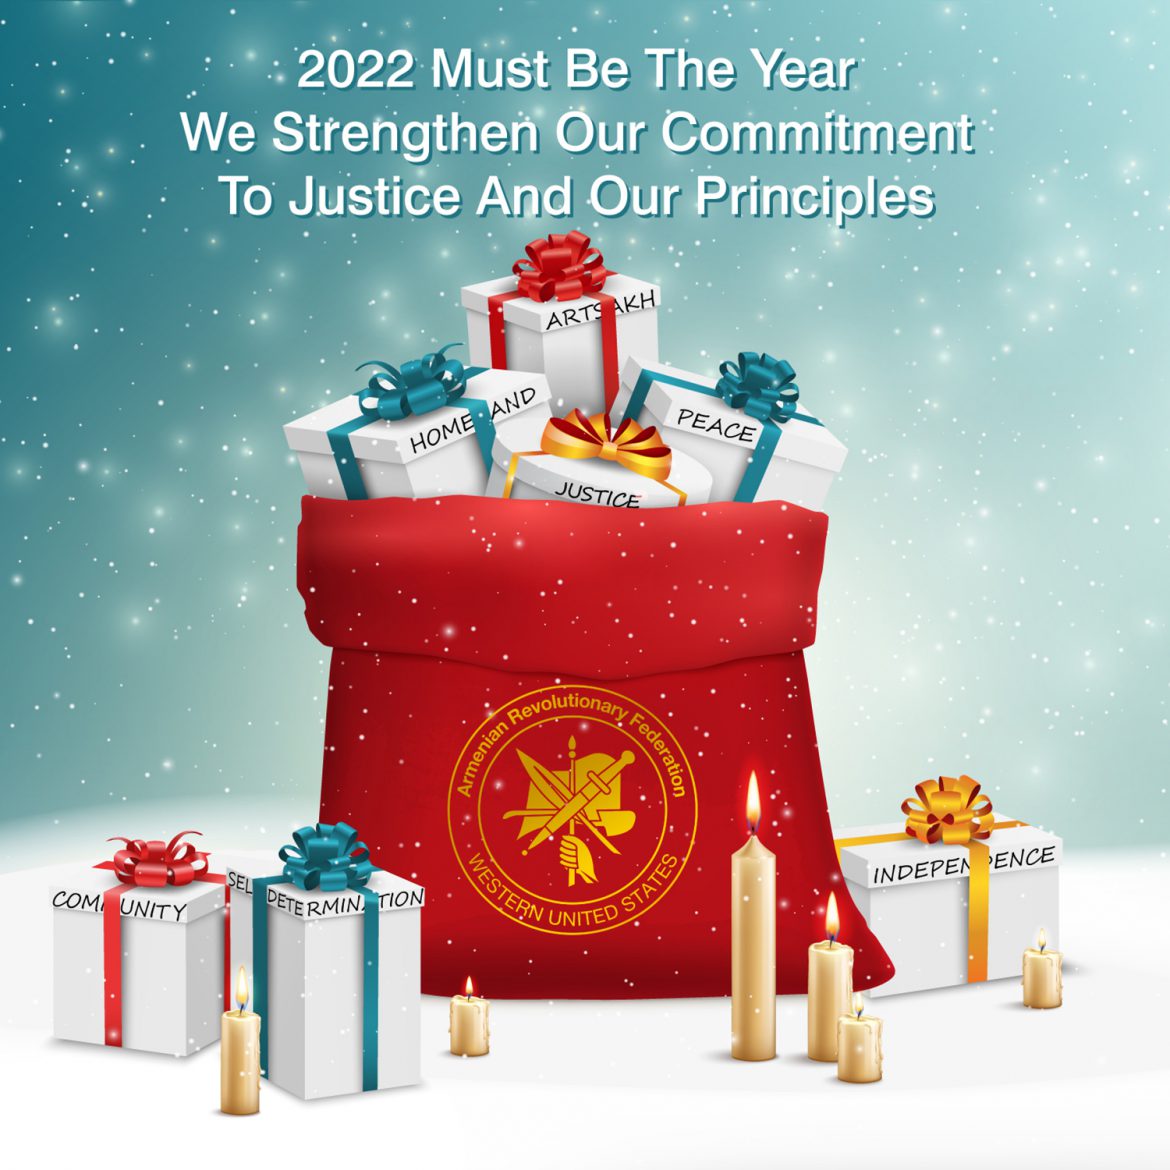 ARF Western U.S. Central Committee 2022 New Year’s Announcement